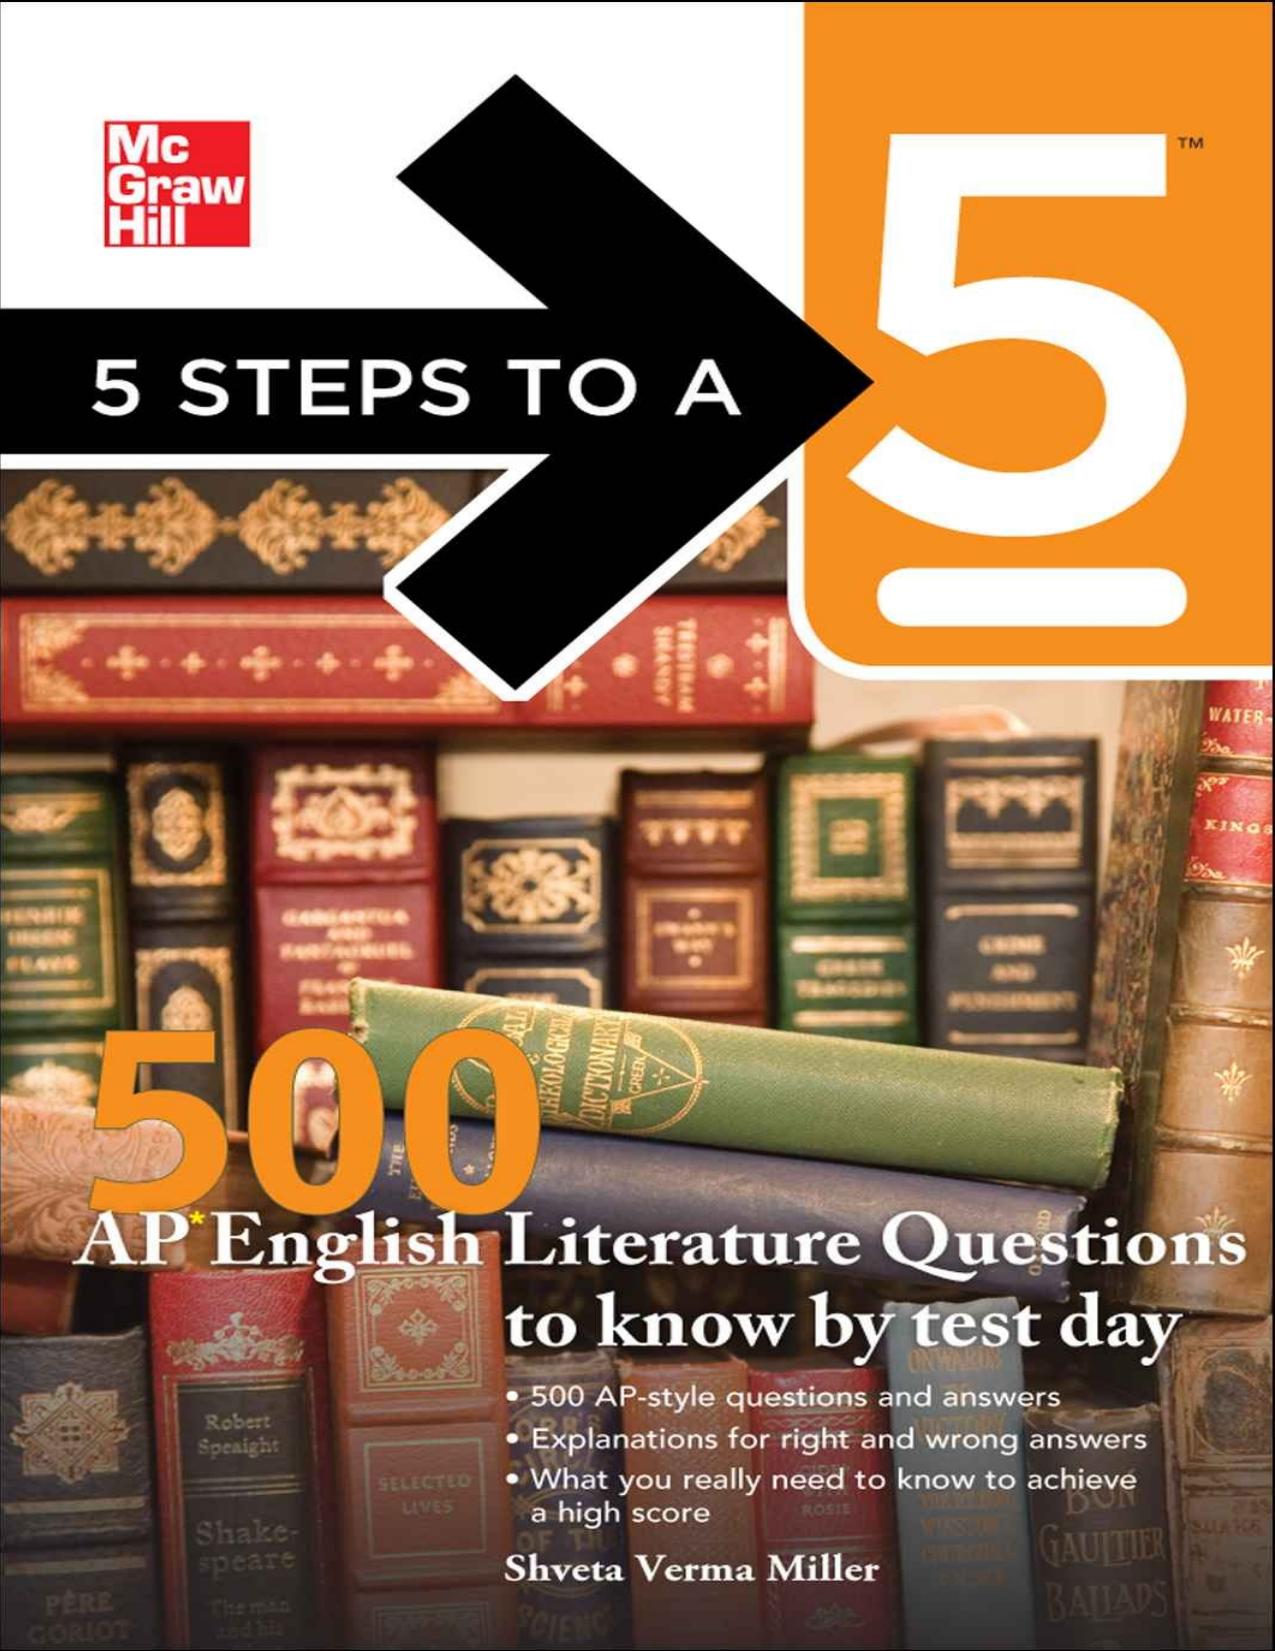 5 Steps to a 5 500 AP English Literature Questions to Know By Test Day - Shveta Verma Miller & Thomas A. editor - Evangelist.jpg